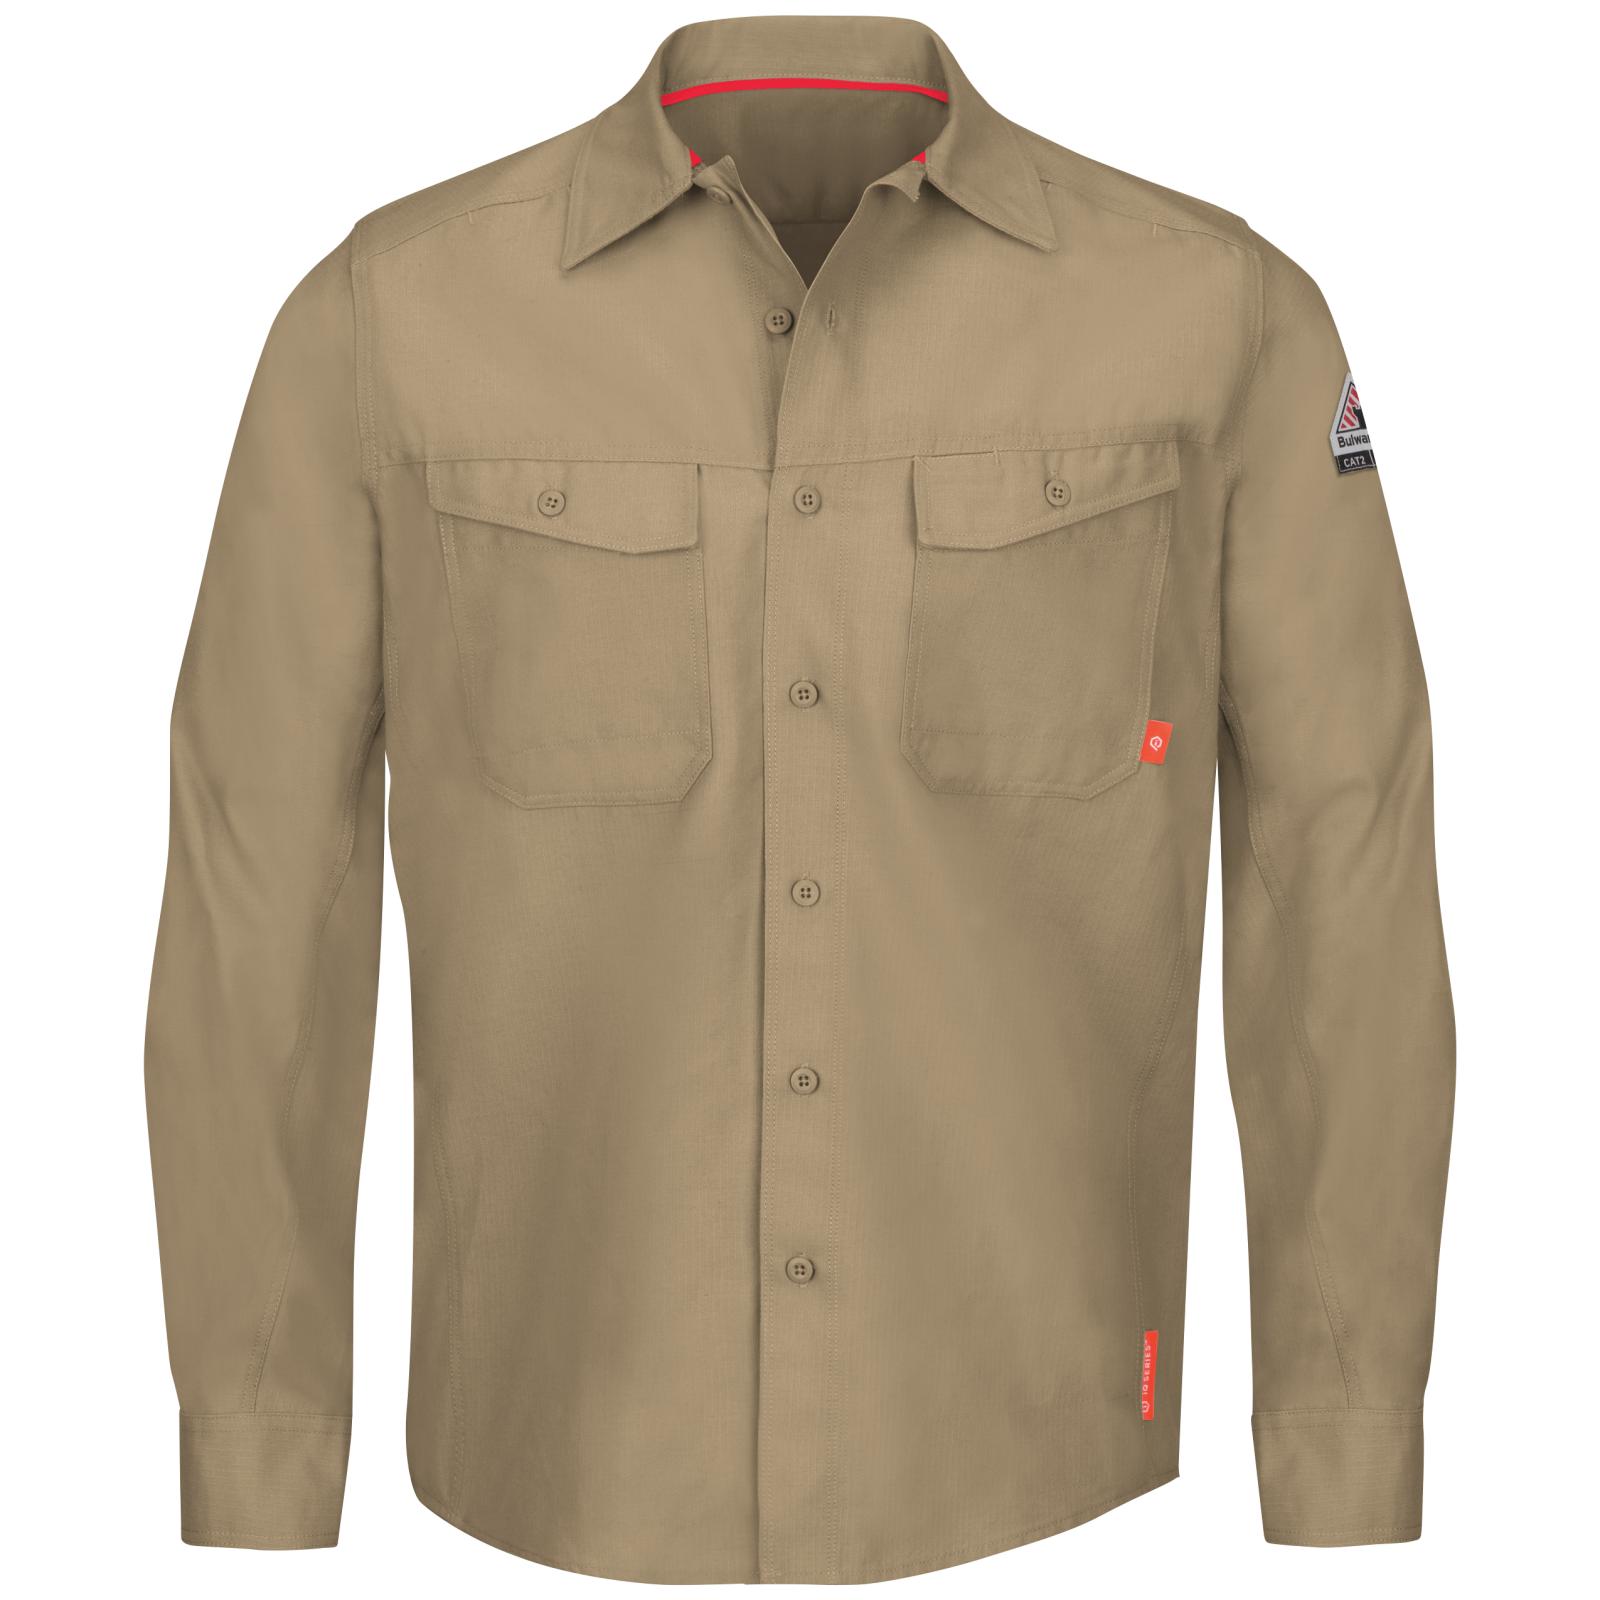 FR Clothing  Supply  Flame Resistant Gear for the Oil  Gas and  Electrical Industries